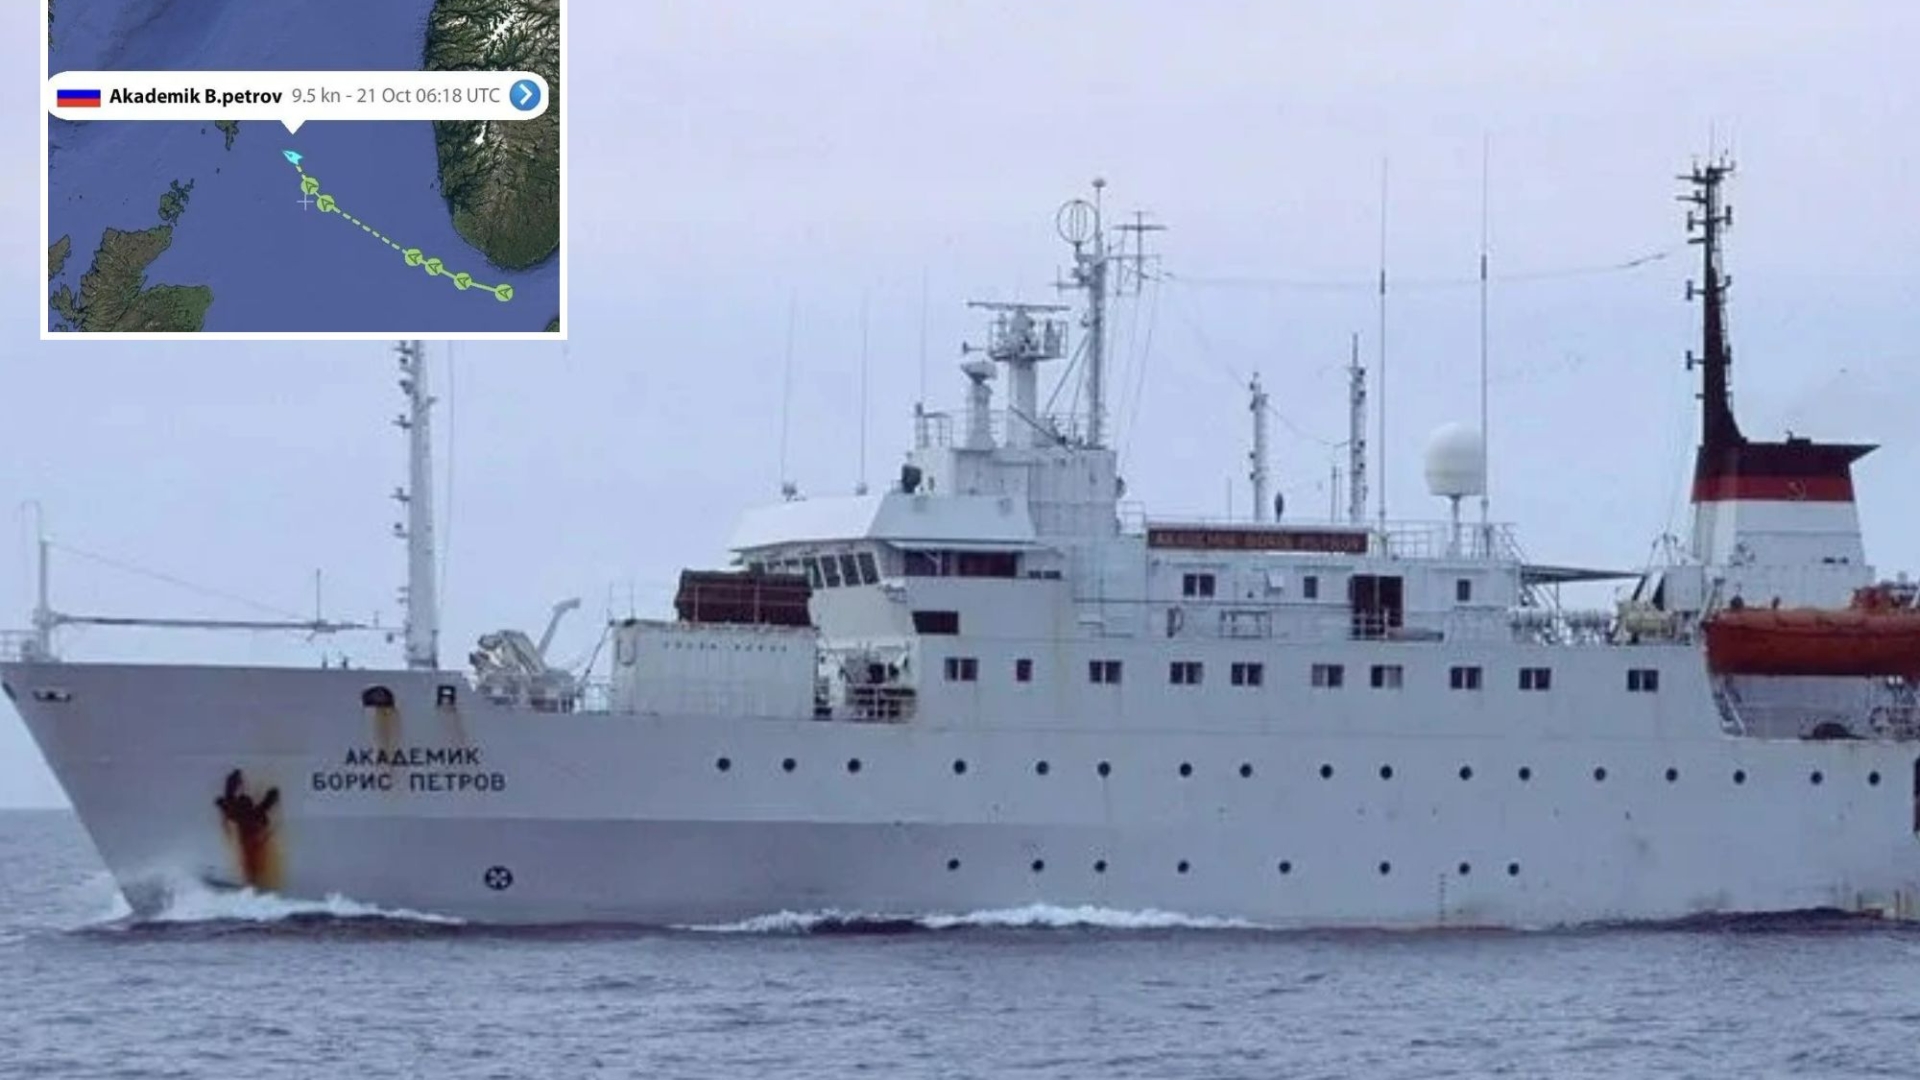 Mystery of cut Shetland cables as Russian 'research' ship sails near islands